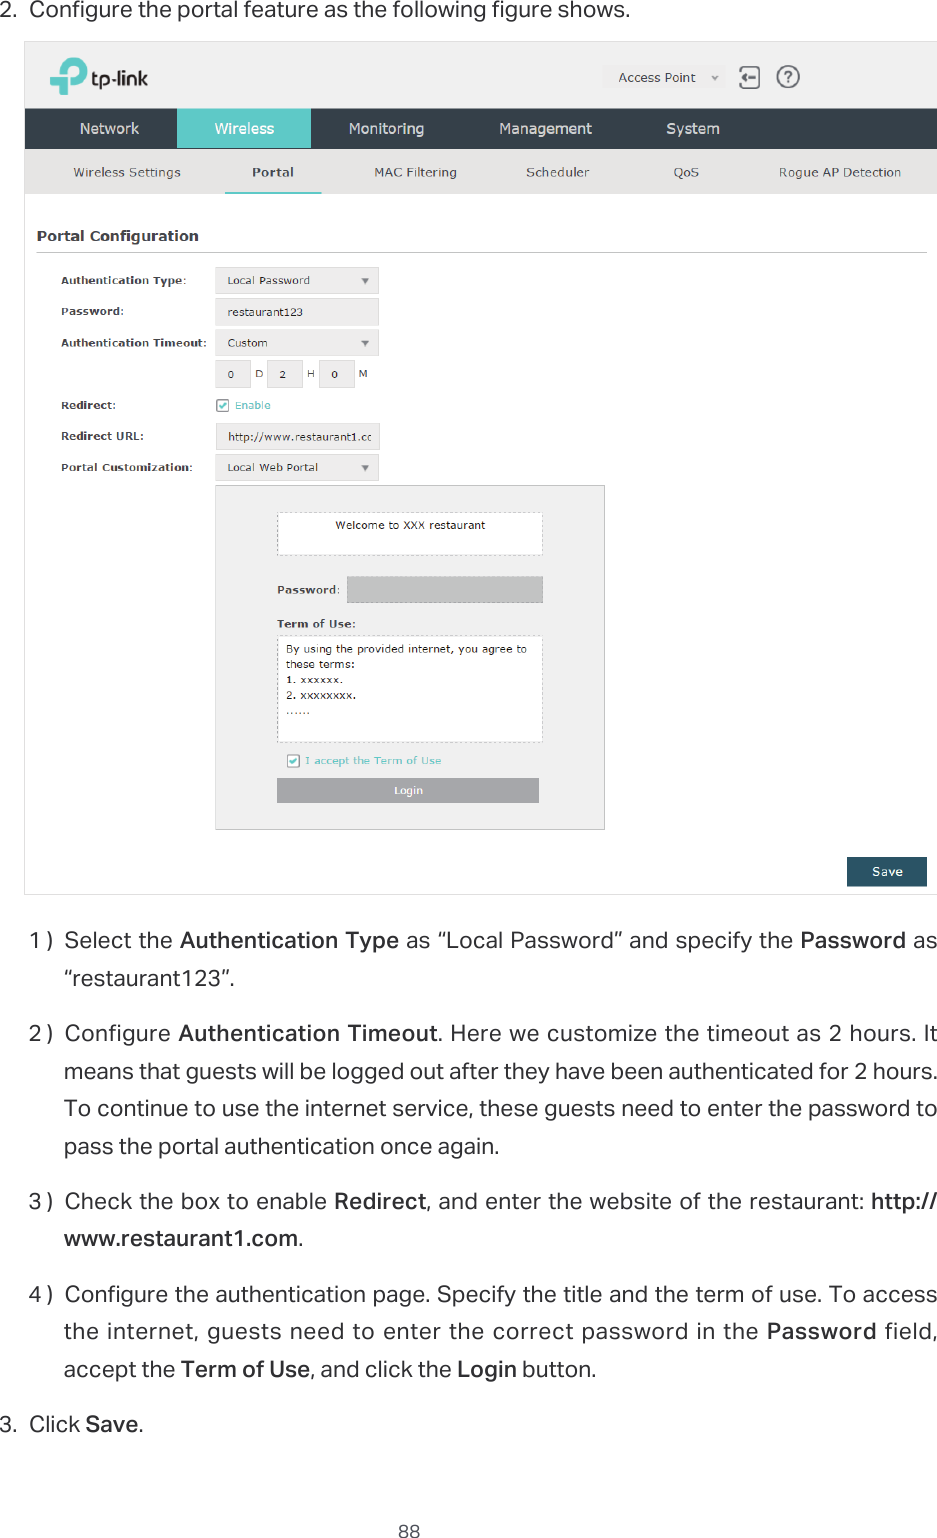  882. Configure the portal feature as the following figure shows.1 ) Select the Authentication Type as “Local Password” and specify the Password as “restaurant123”.2 ) Configure Authentication Timeout. Here we customize the timeout as 2 hours. It means that guests will be logged out after they have been authenticated for 2 hours. To continue to use the internet service, these guests need to enter the password to pass the portal authentication once again.3 ) Check the box to enable Redirect, and enter the website of the restaurant: http://www.restaurant1.com.4 ) Congure the authentication page. Specify the title and the term of use. To access the internet, guests need to enter the correct password in the Password field, accept the Term of Use, and click the Login button.3. Click Save.